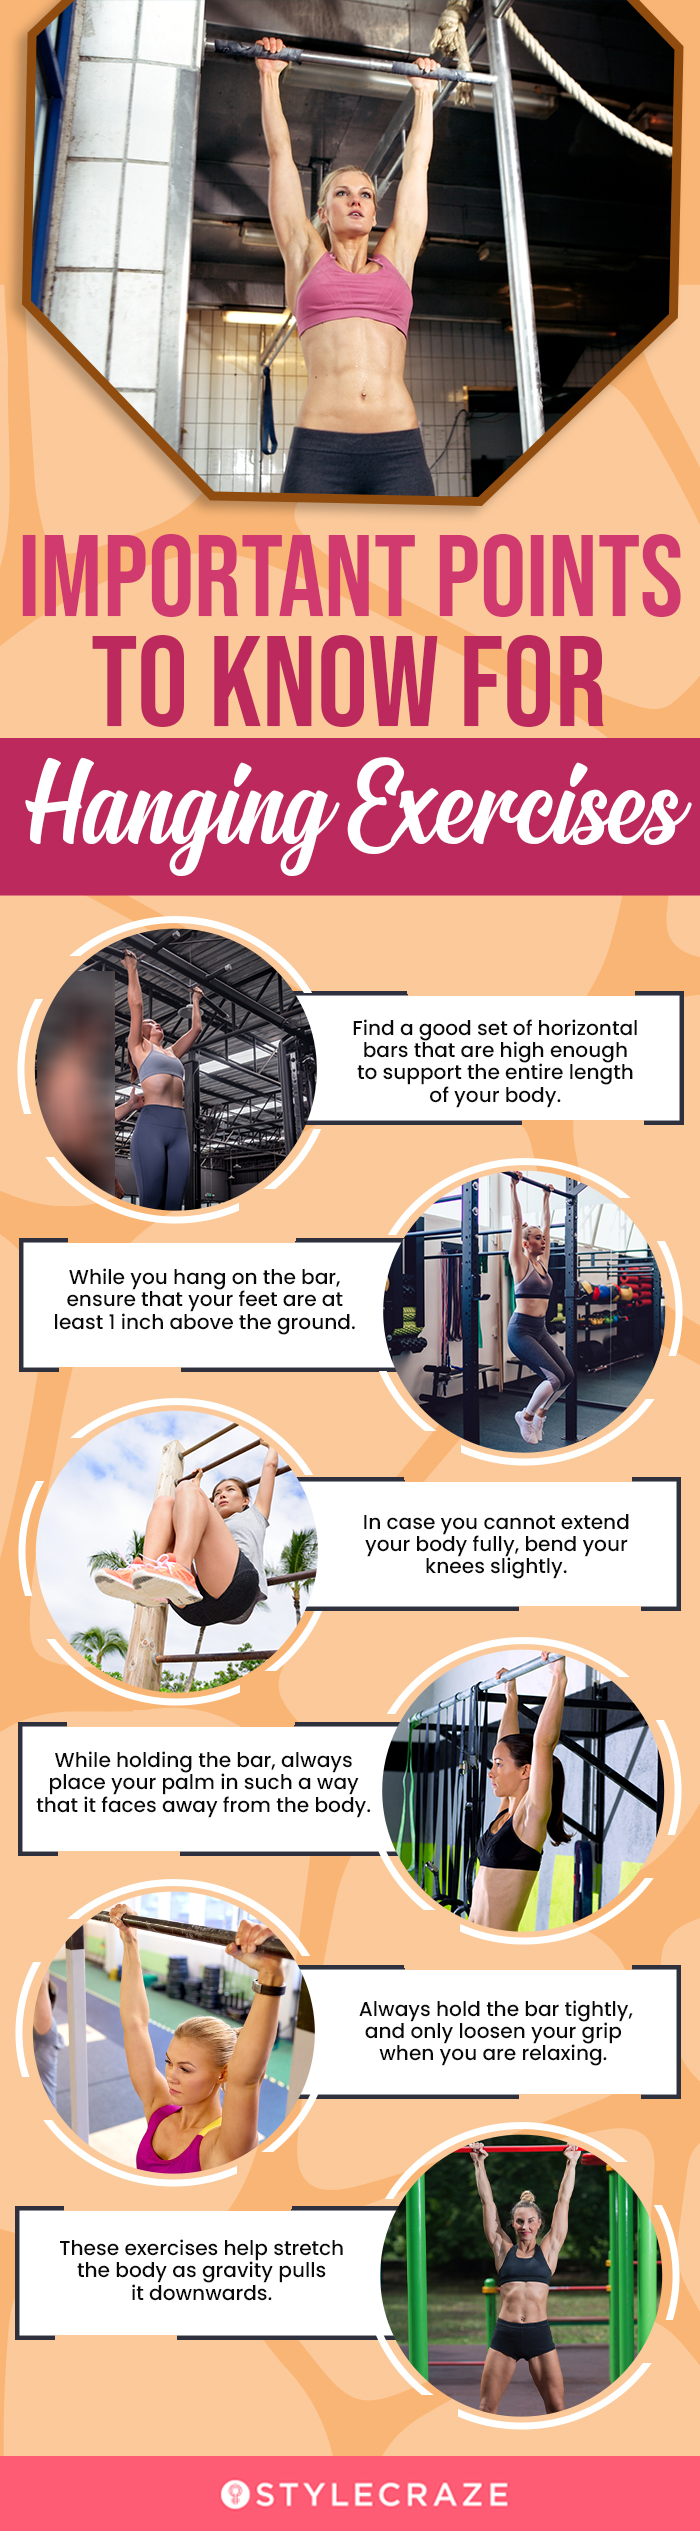 important points to know for hanging exercise (infographic)